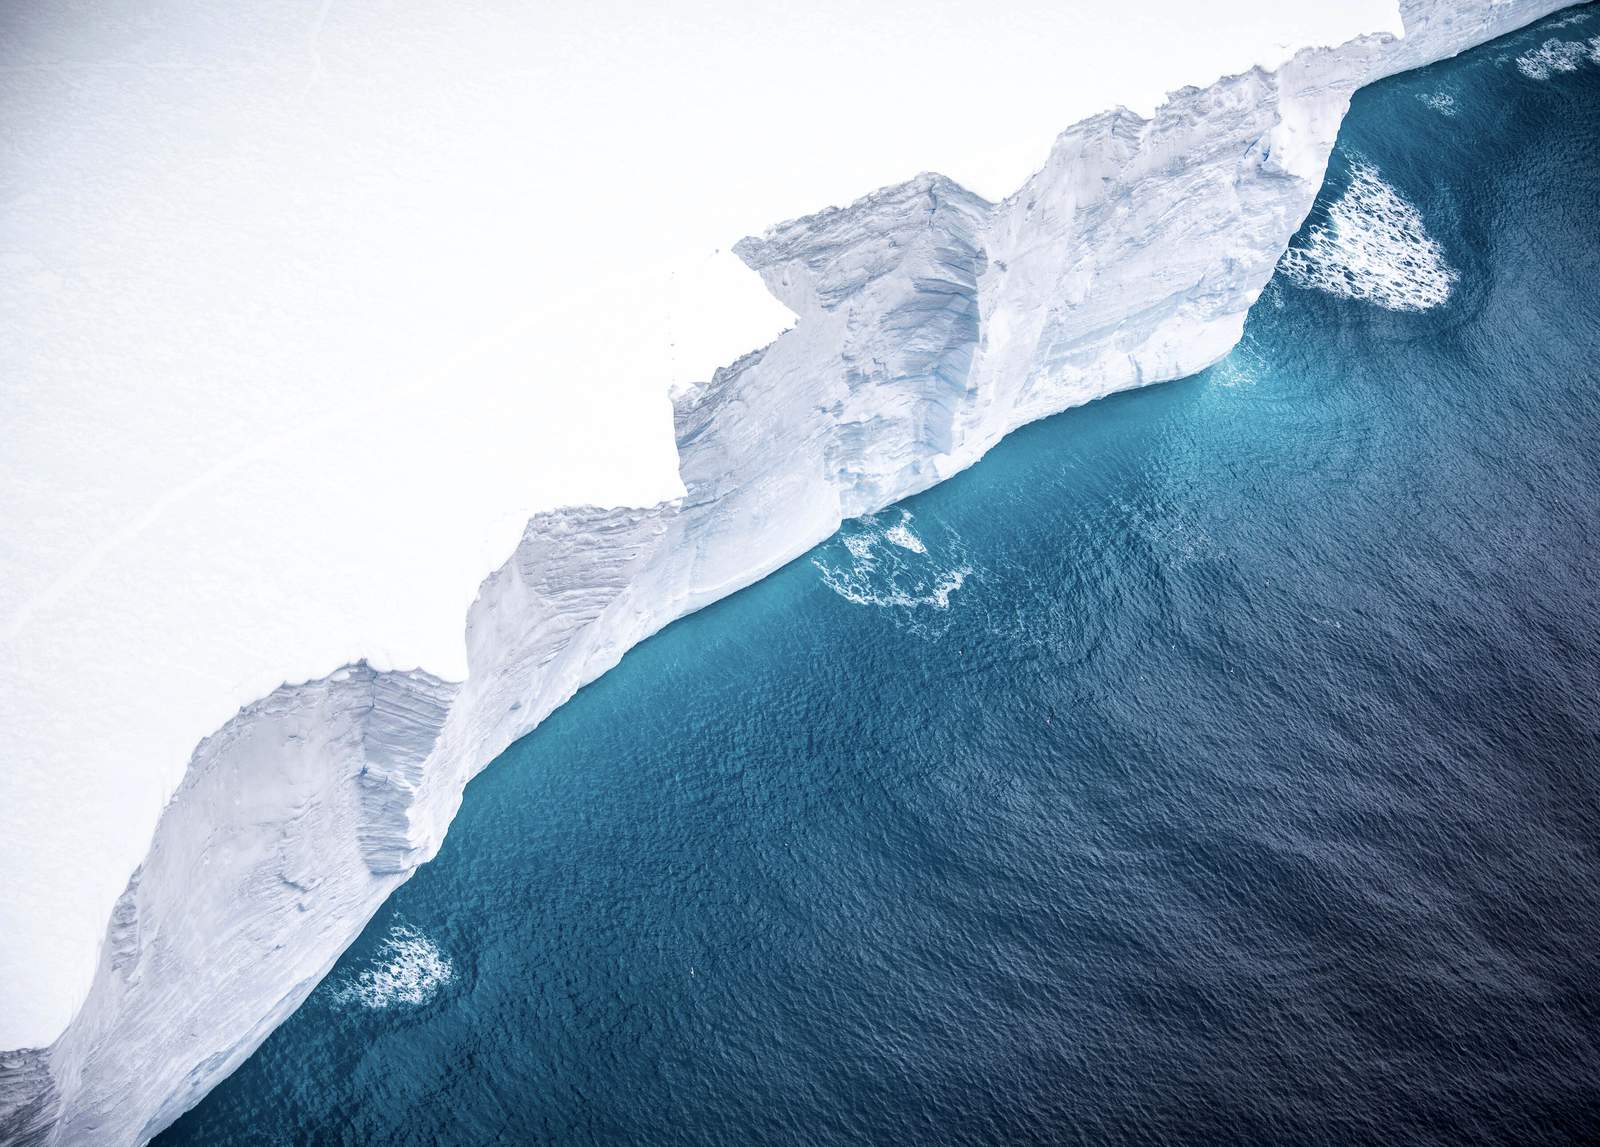 Research trip to study impact of giant floating iceberg